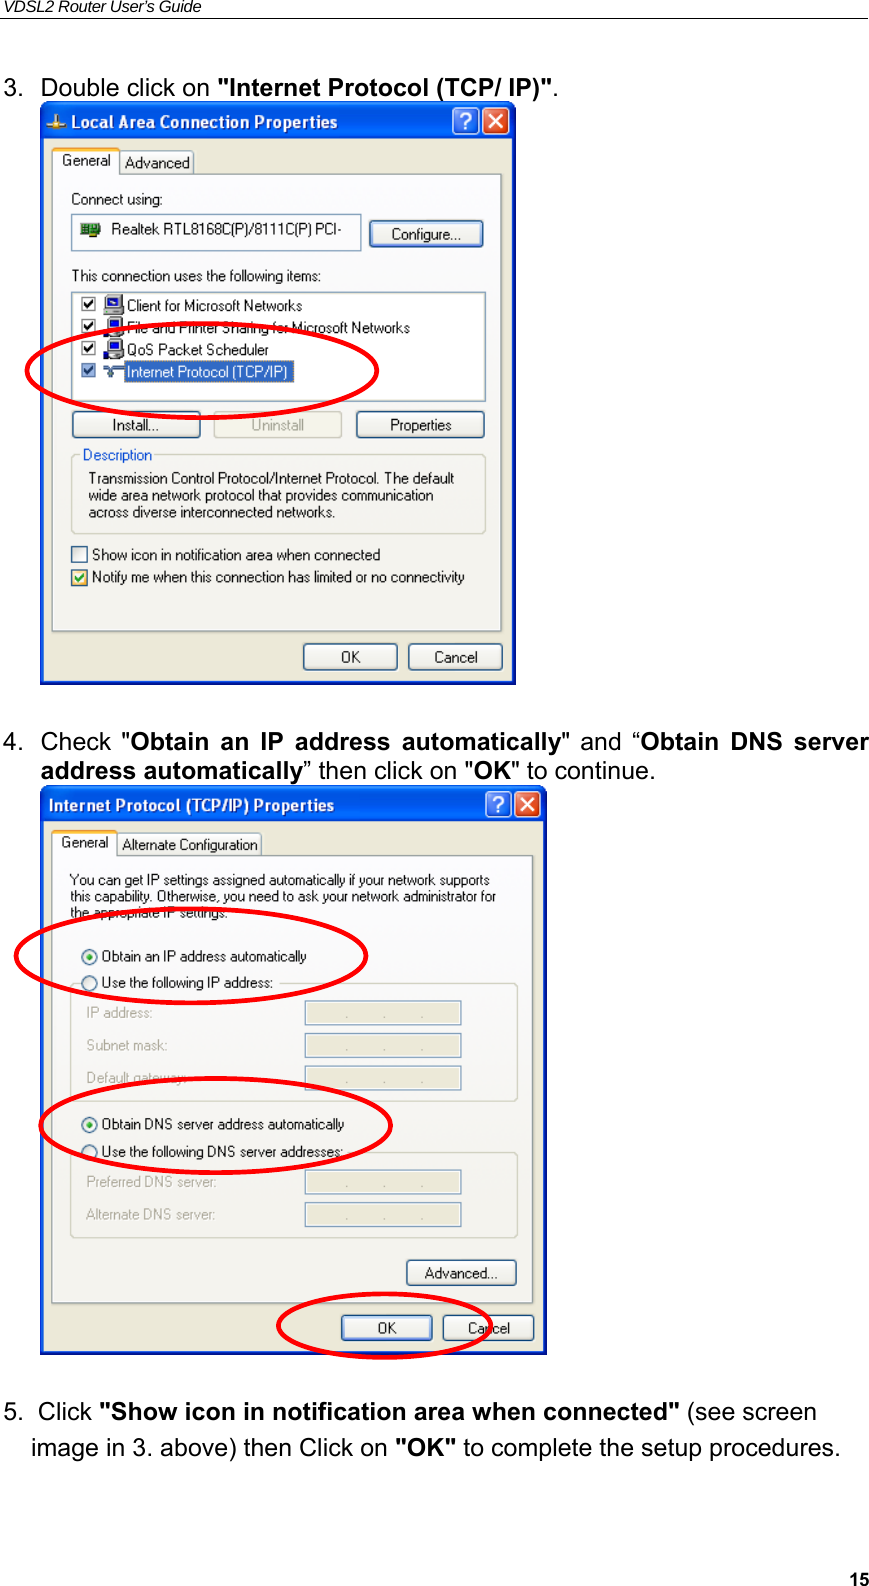 VDSL2 Router User’s Guide     153.  Double click on &quot;Internet Protocol (TCP/ IP)&quot;.   4.  Check  &quot;Obtain  an  IP  address  automatically&quot;  and  “Obtain  DNS  server address automatically” then click on &quot;OK&quot; to continue.    5.  Click &quot;Show icon in notification area when connected&quot; (see screen     image in 3. above) then Click on &quot;OK&quot; to complete the setup procedures. 